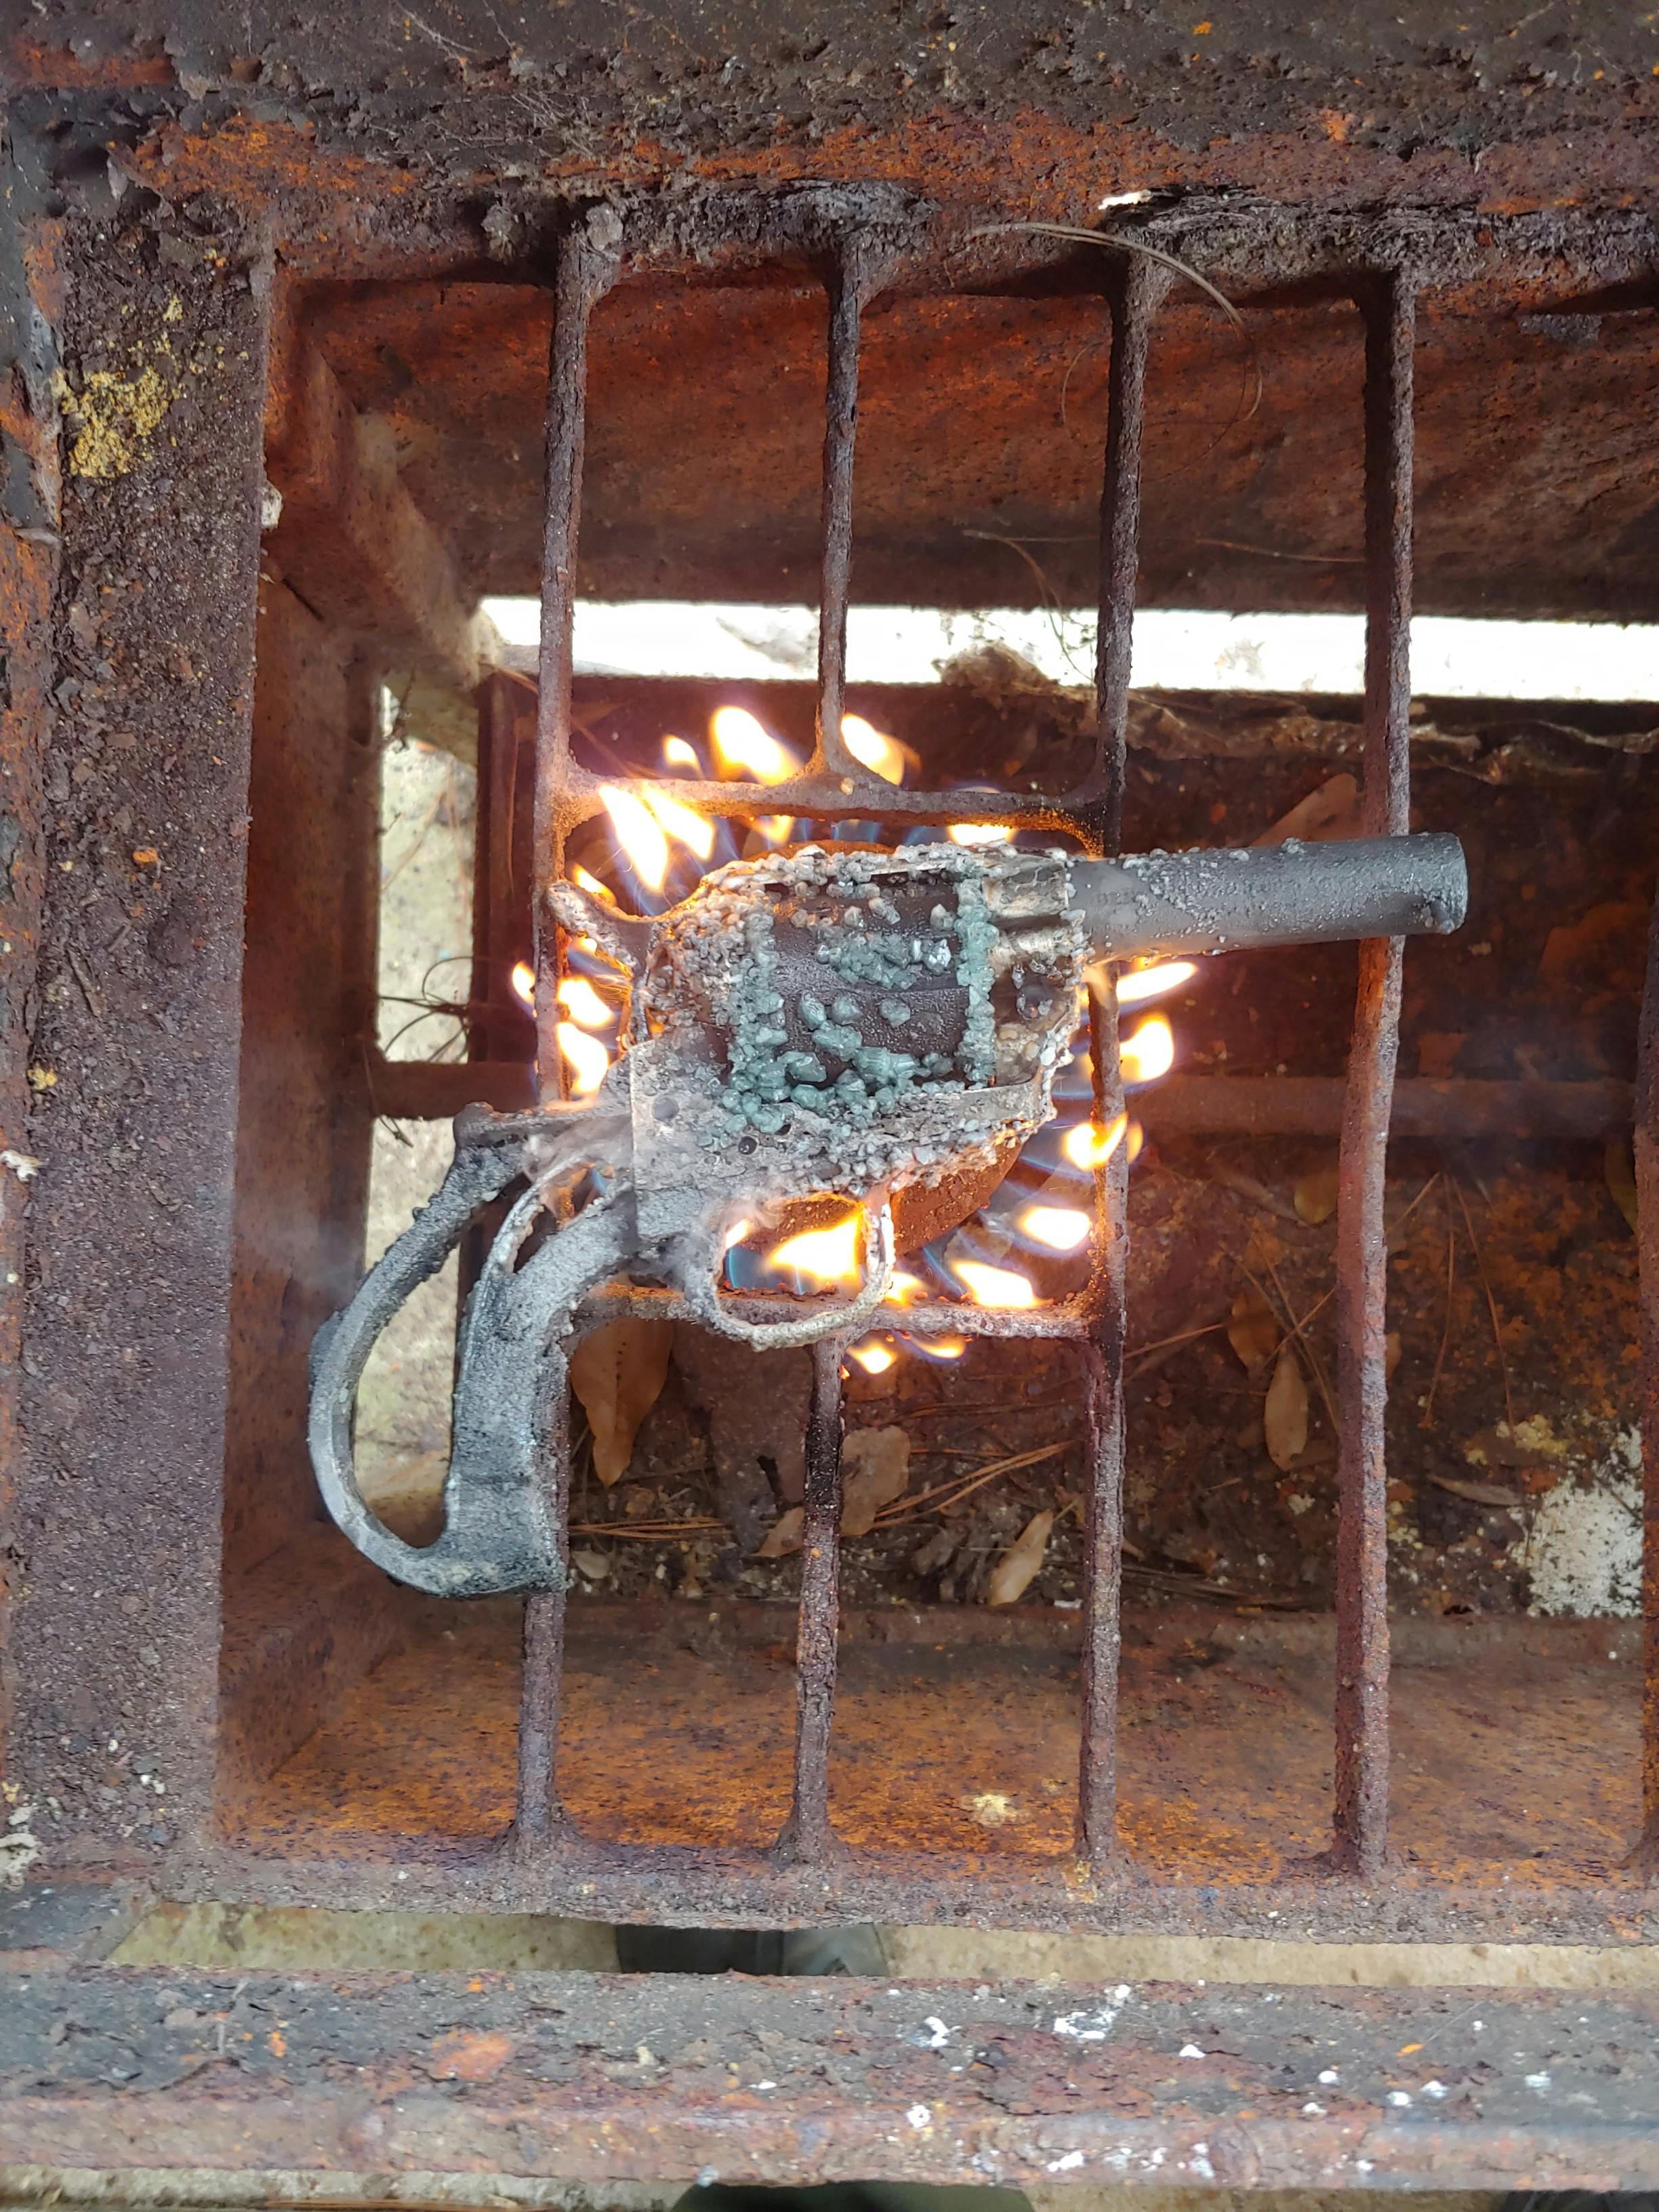 revolver handgun with crystals forming on it while roasting over a burner on a grill